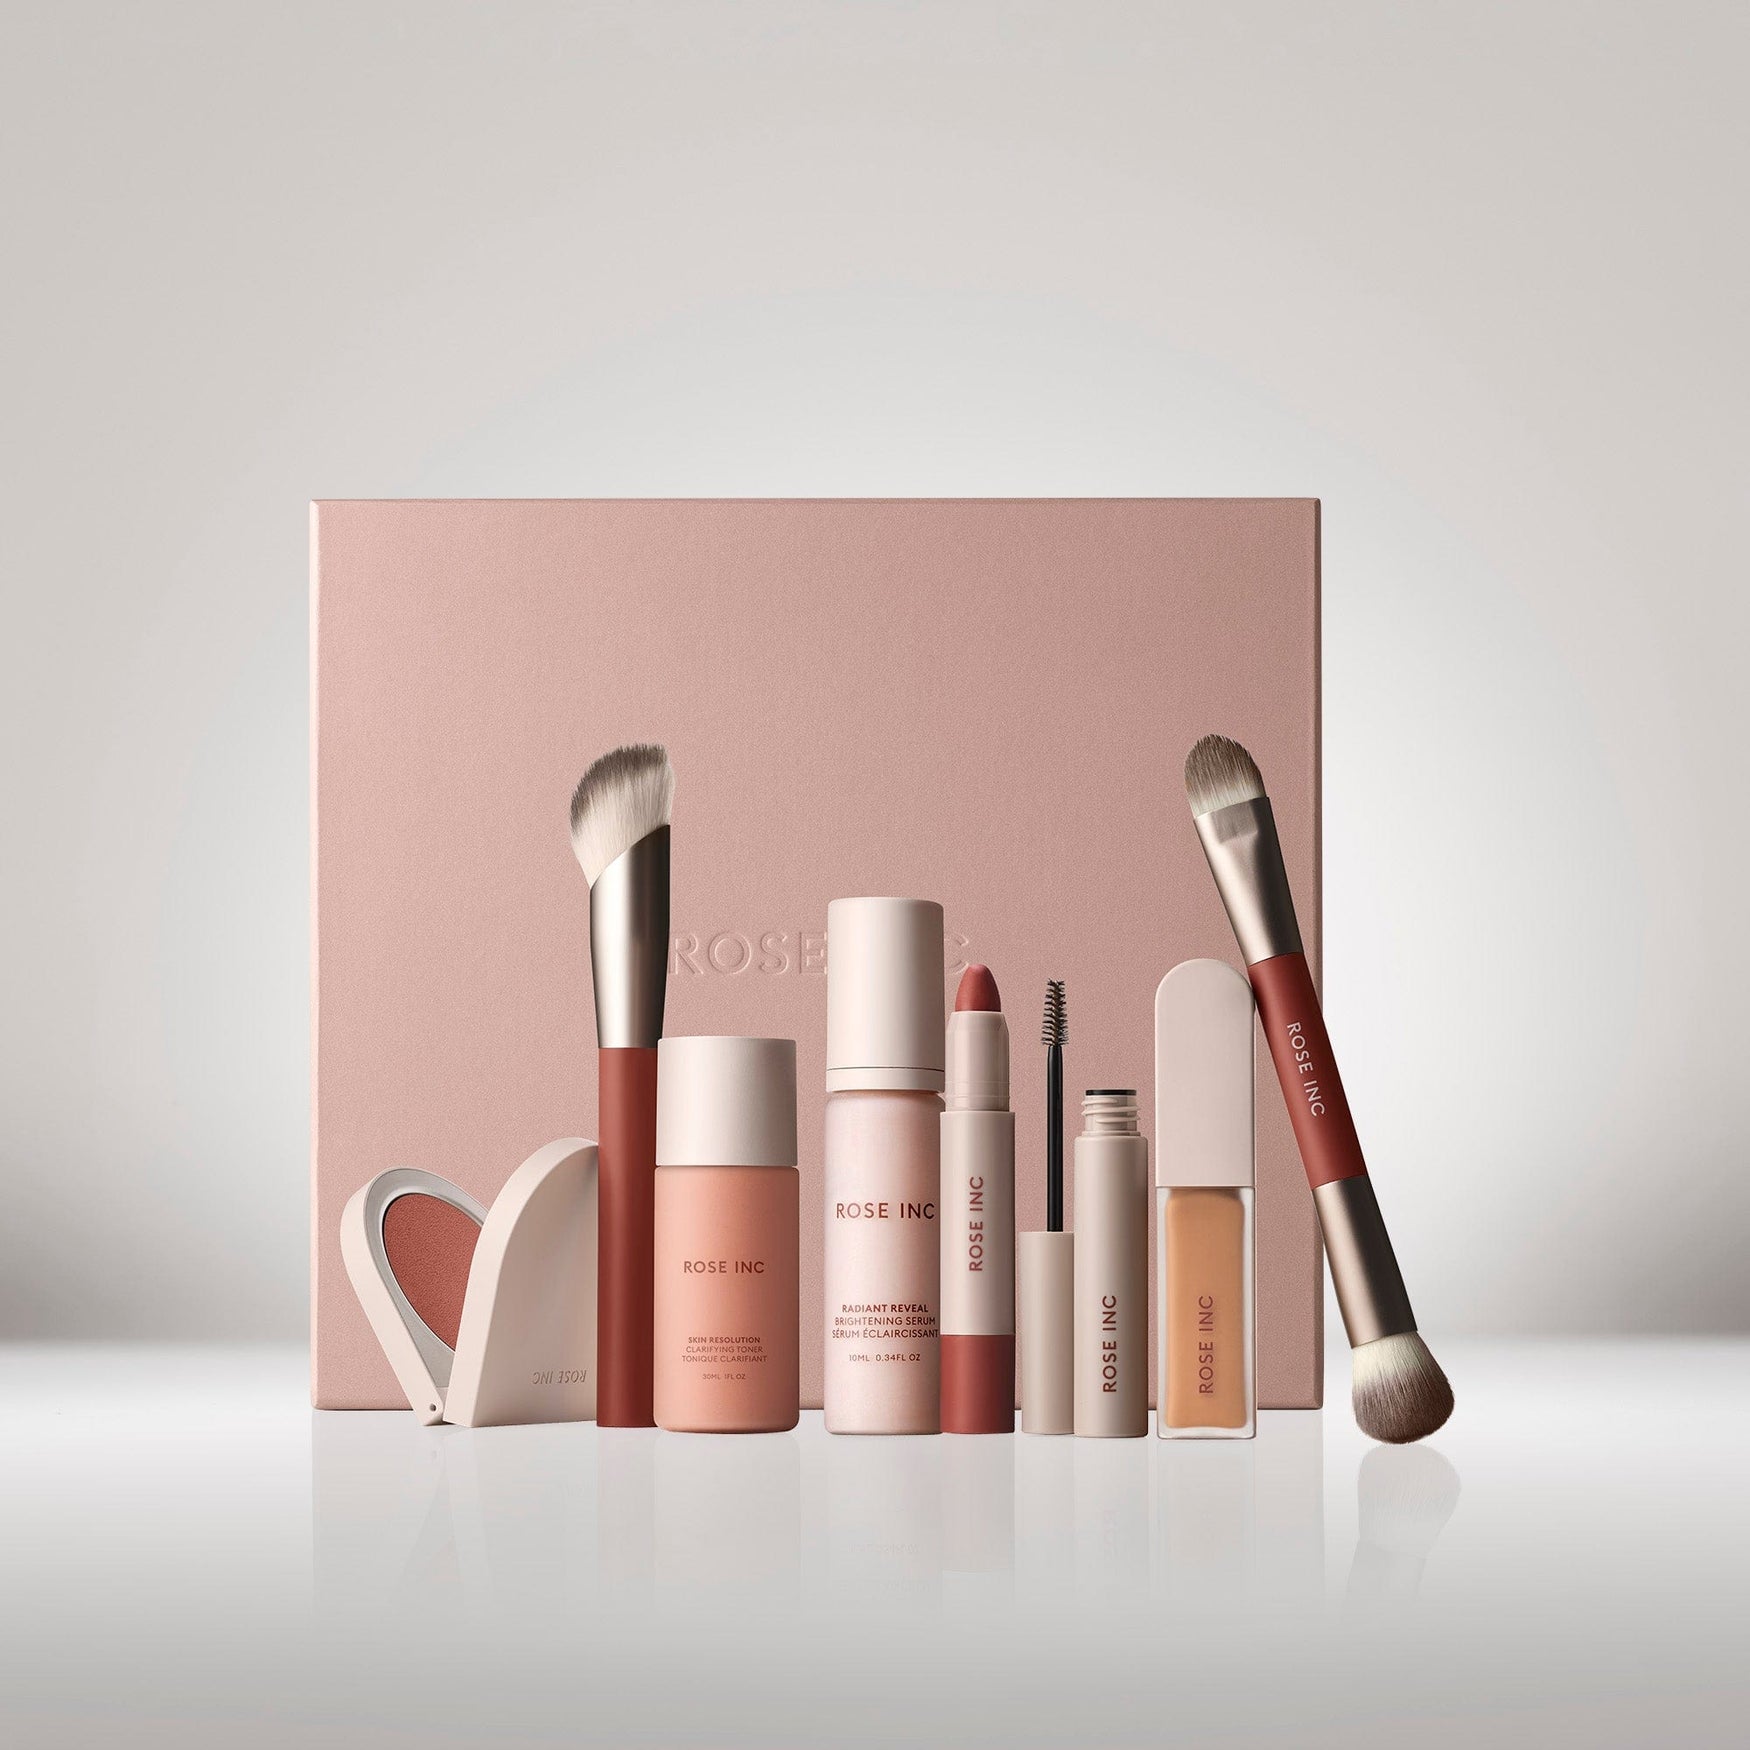 Roseinc : Explore limited edition gift sets for Mother’s Day